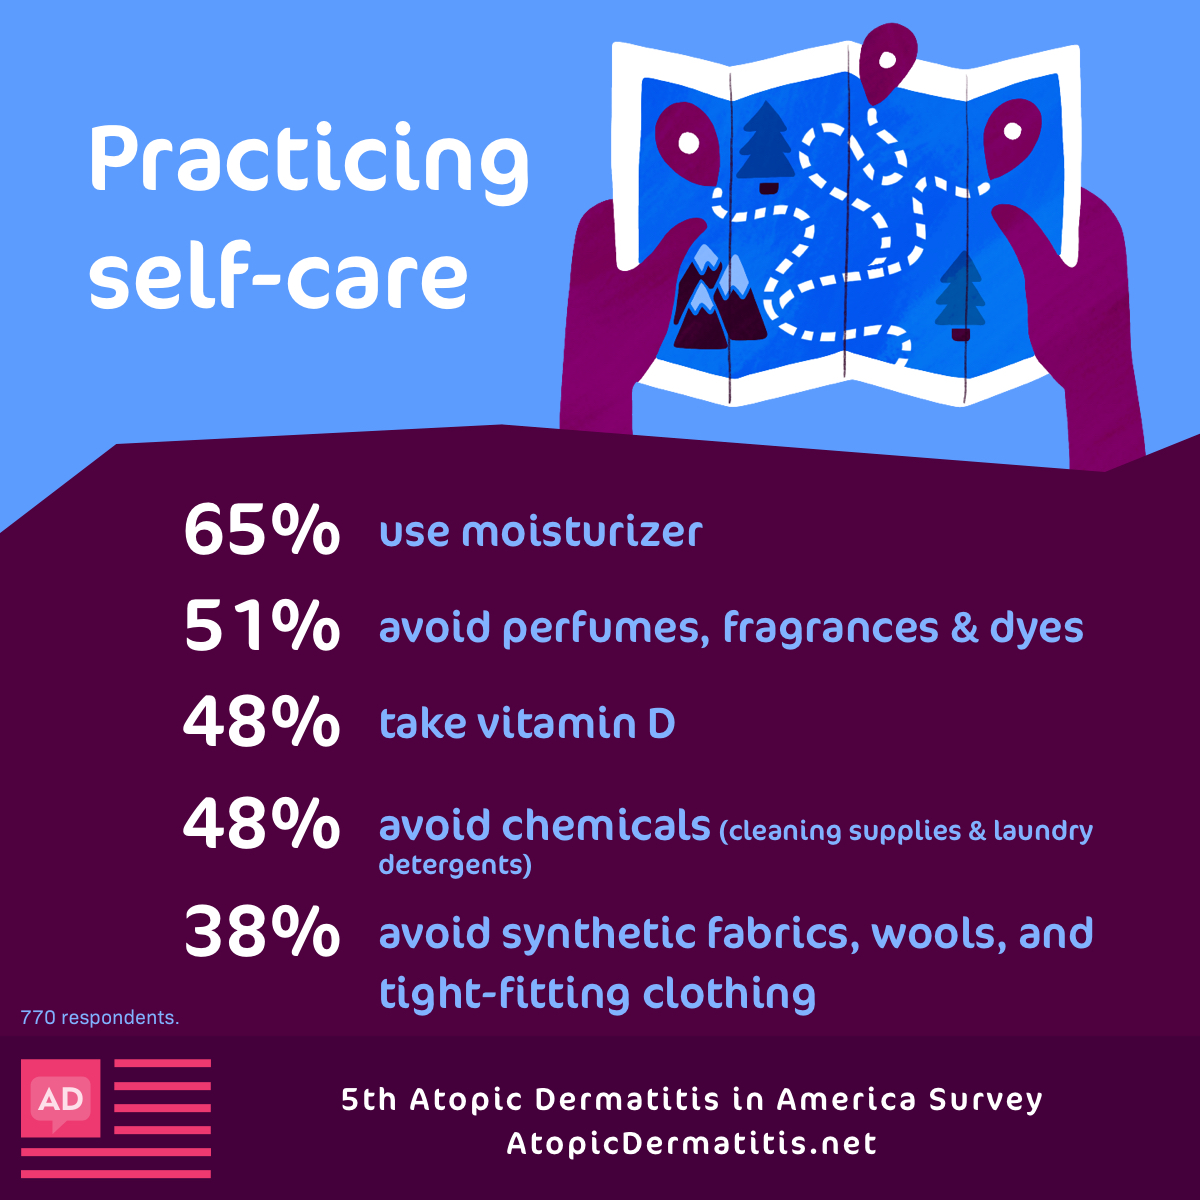 A majority of respondents rely on moisturizers and avoiding triggers to manage their eczema.